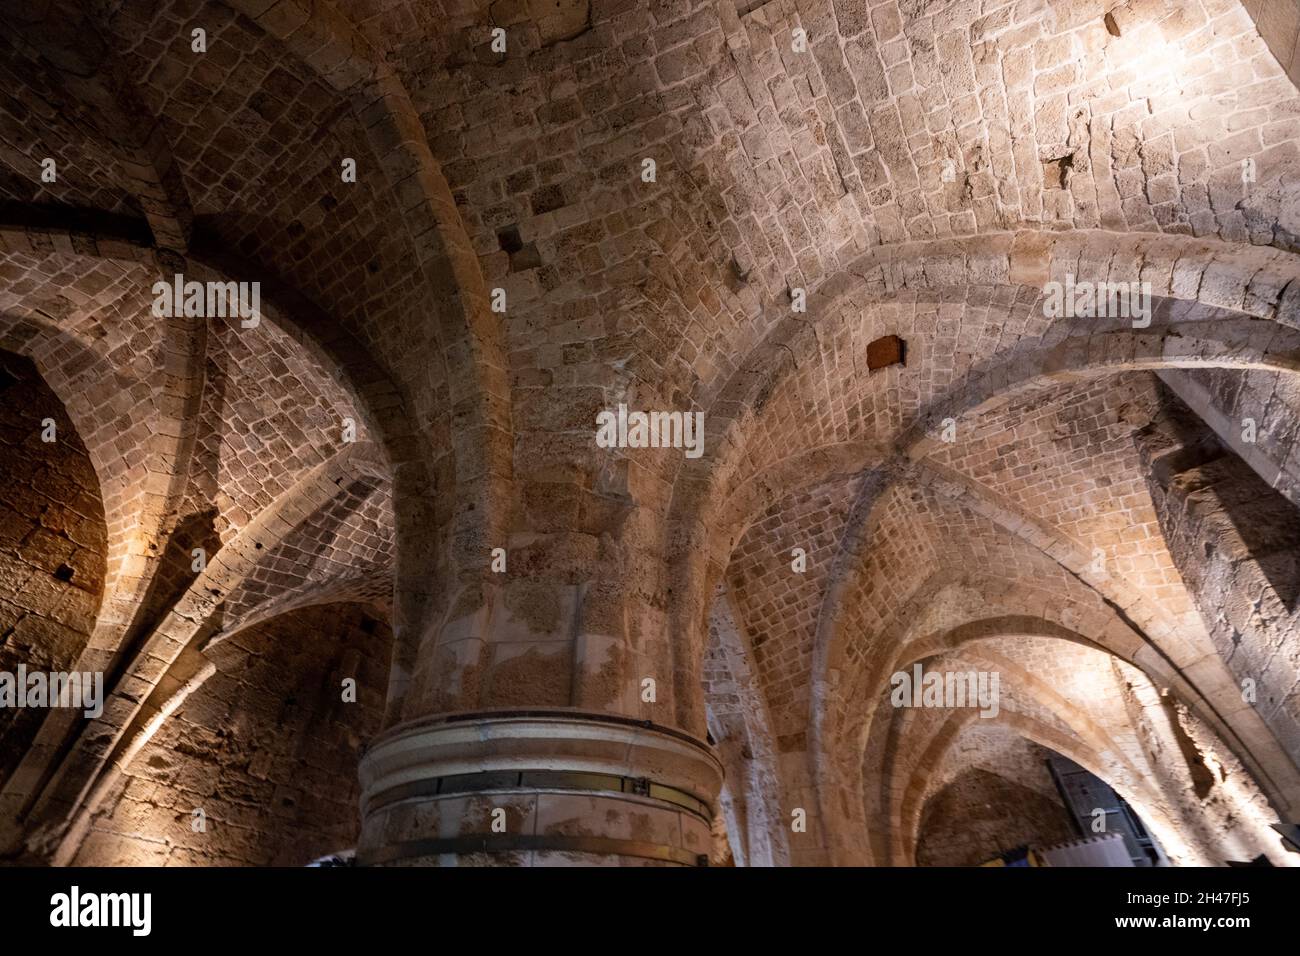 Israel, Acre, The subterranean crusaders knight's halls in old Akko Stock Photo